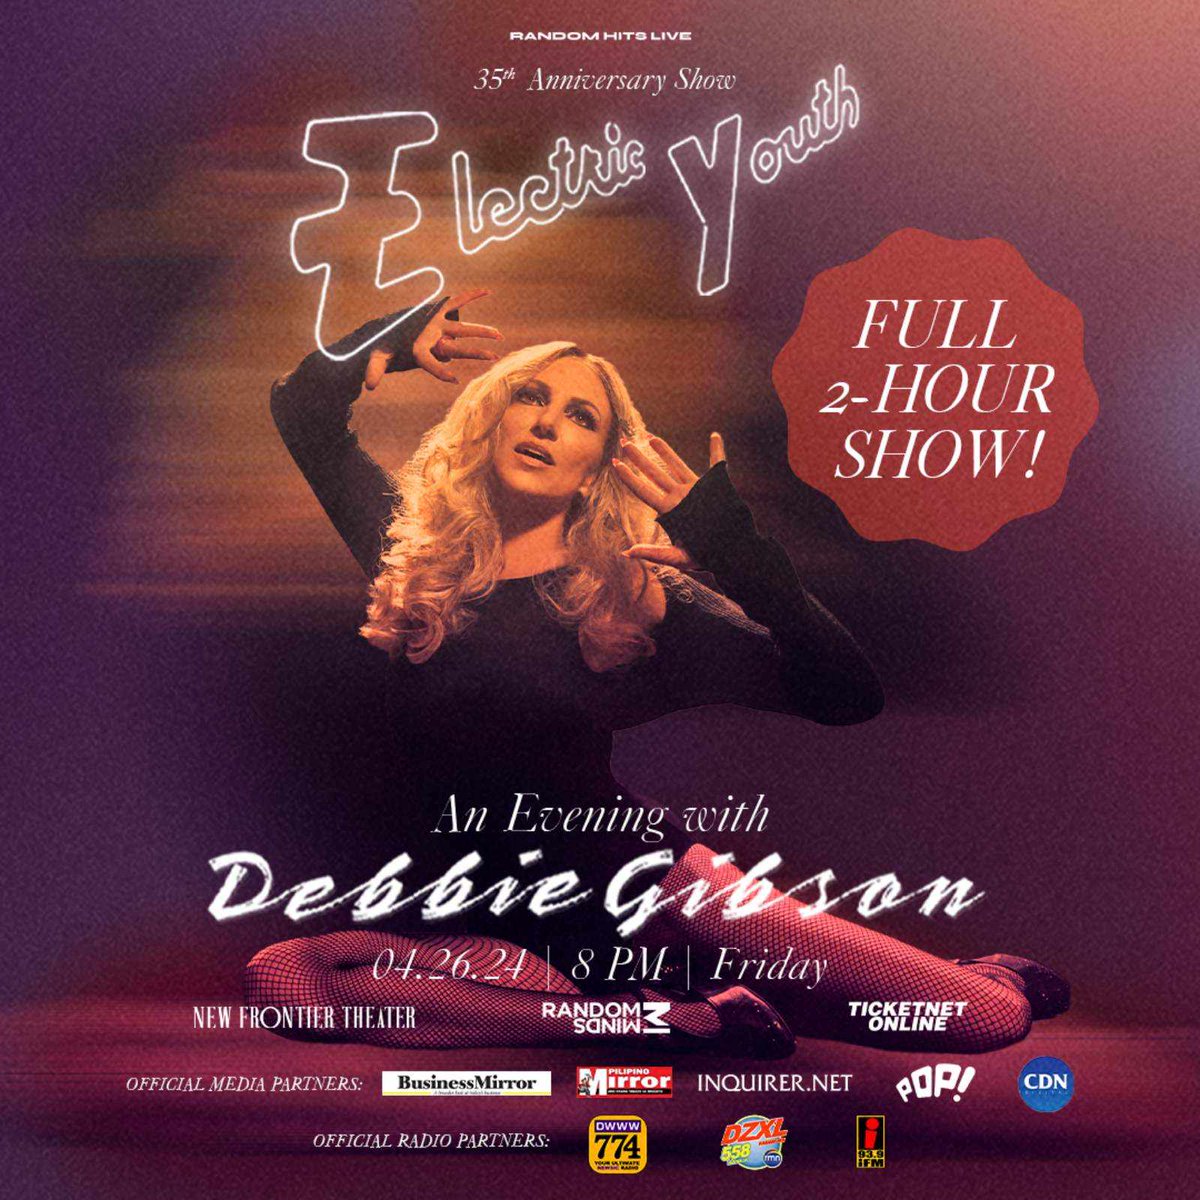 Check out this article: Debbie Gibson, Pop Music Icon set to electrify Manila Anniversary Show with an Electric Youth! - vicvicbautista.com/2024/04/03/deb… #ey35 #debbiegibson #randomminds #RandomHitsLive #rmhits #settingstandard @RandomMindsPH